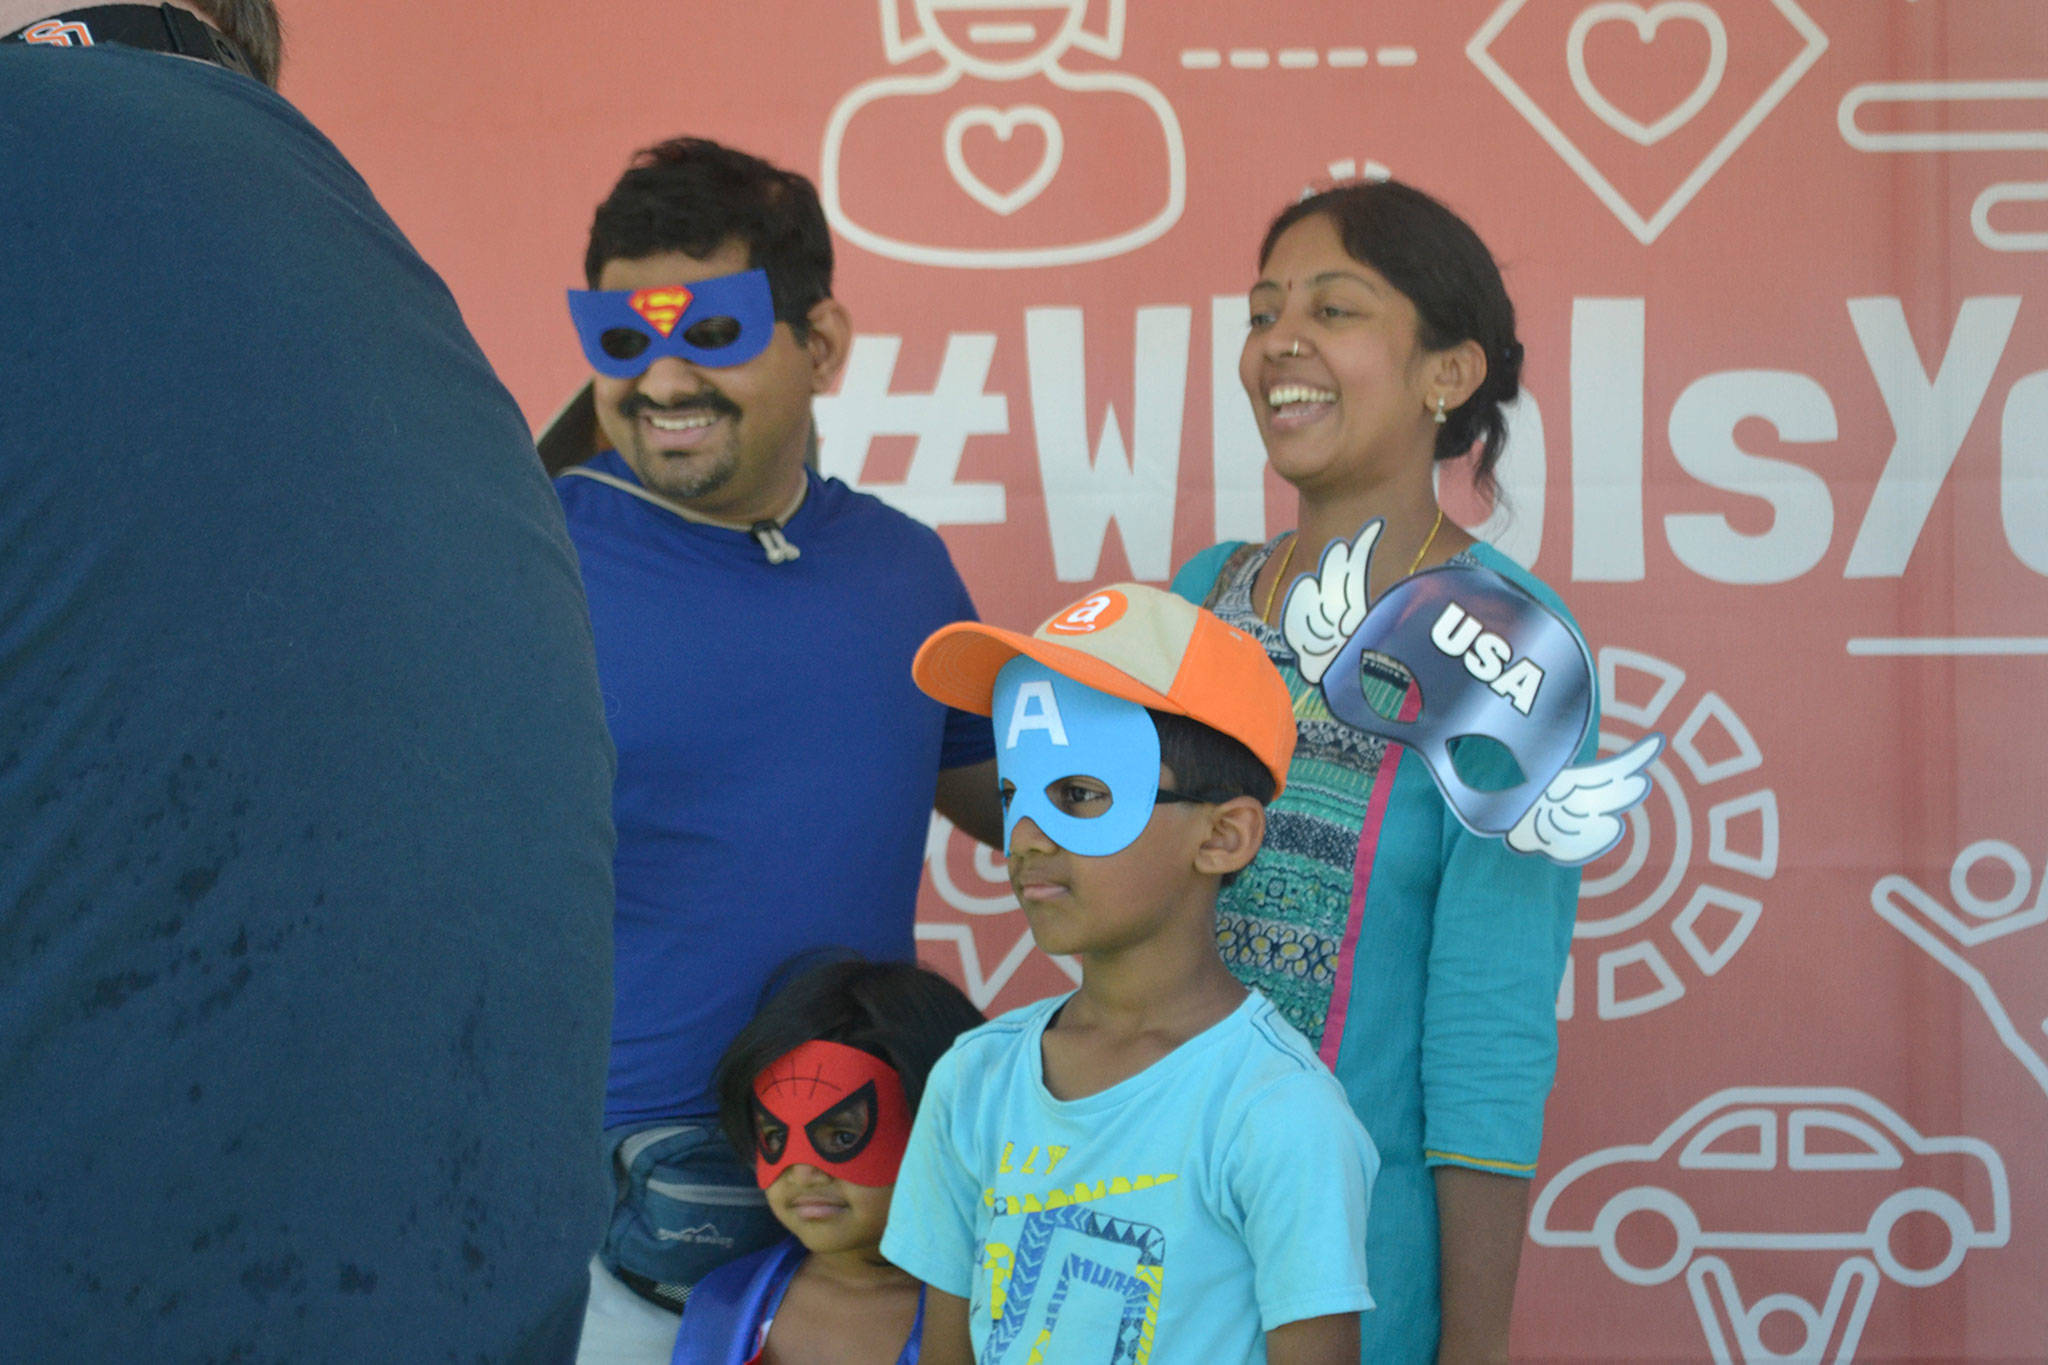 A family poses for a photo booth picture at Derby Days in Redmond. Katie Metzger/staff photo